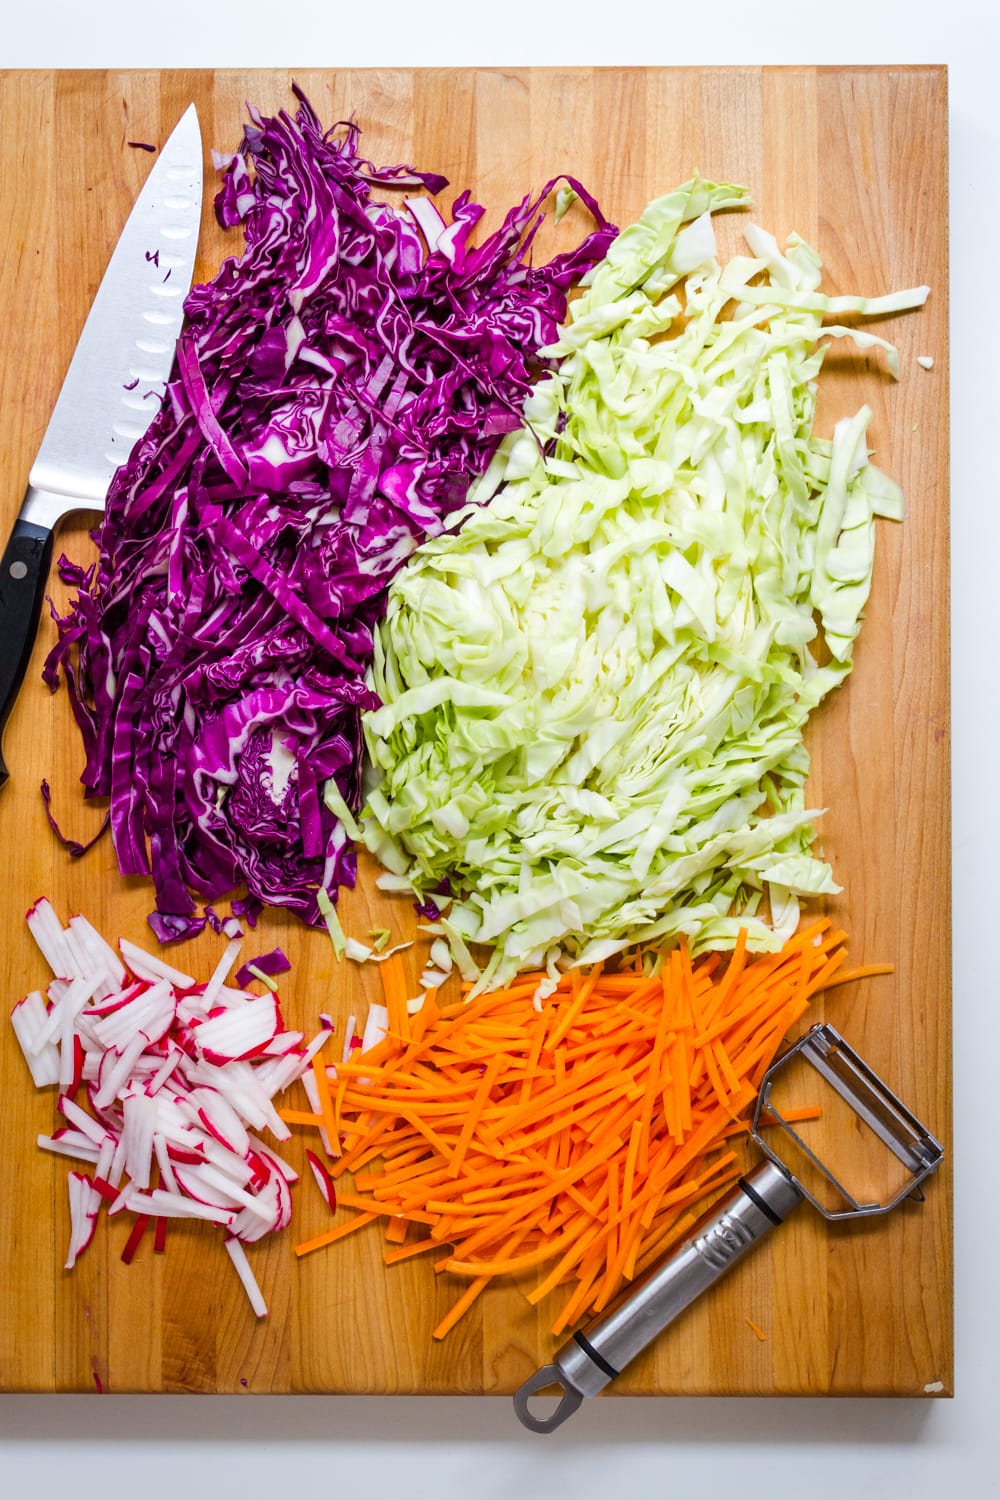 top down view of prepped ingredients for asian slaw salad on a wooden cutting board.